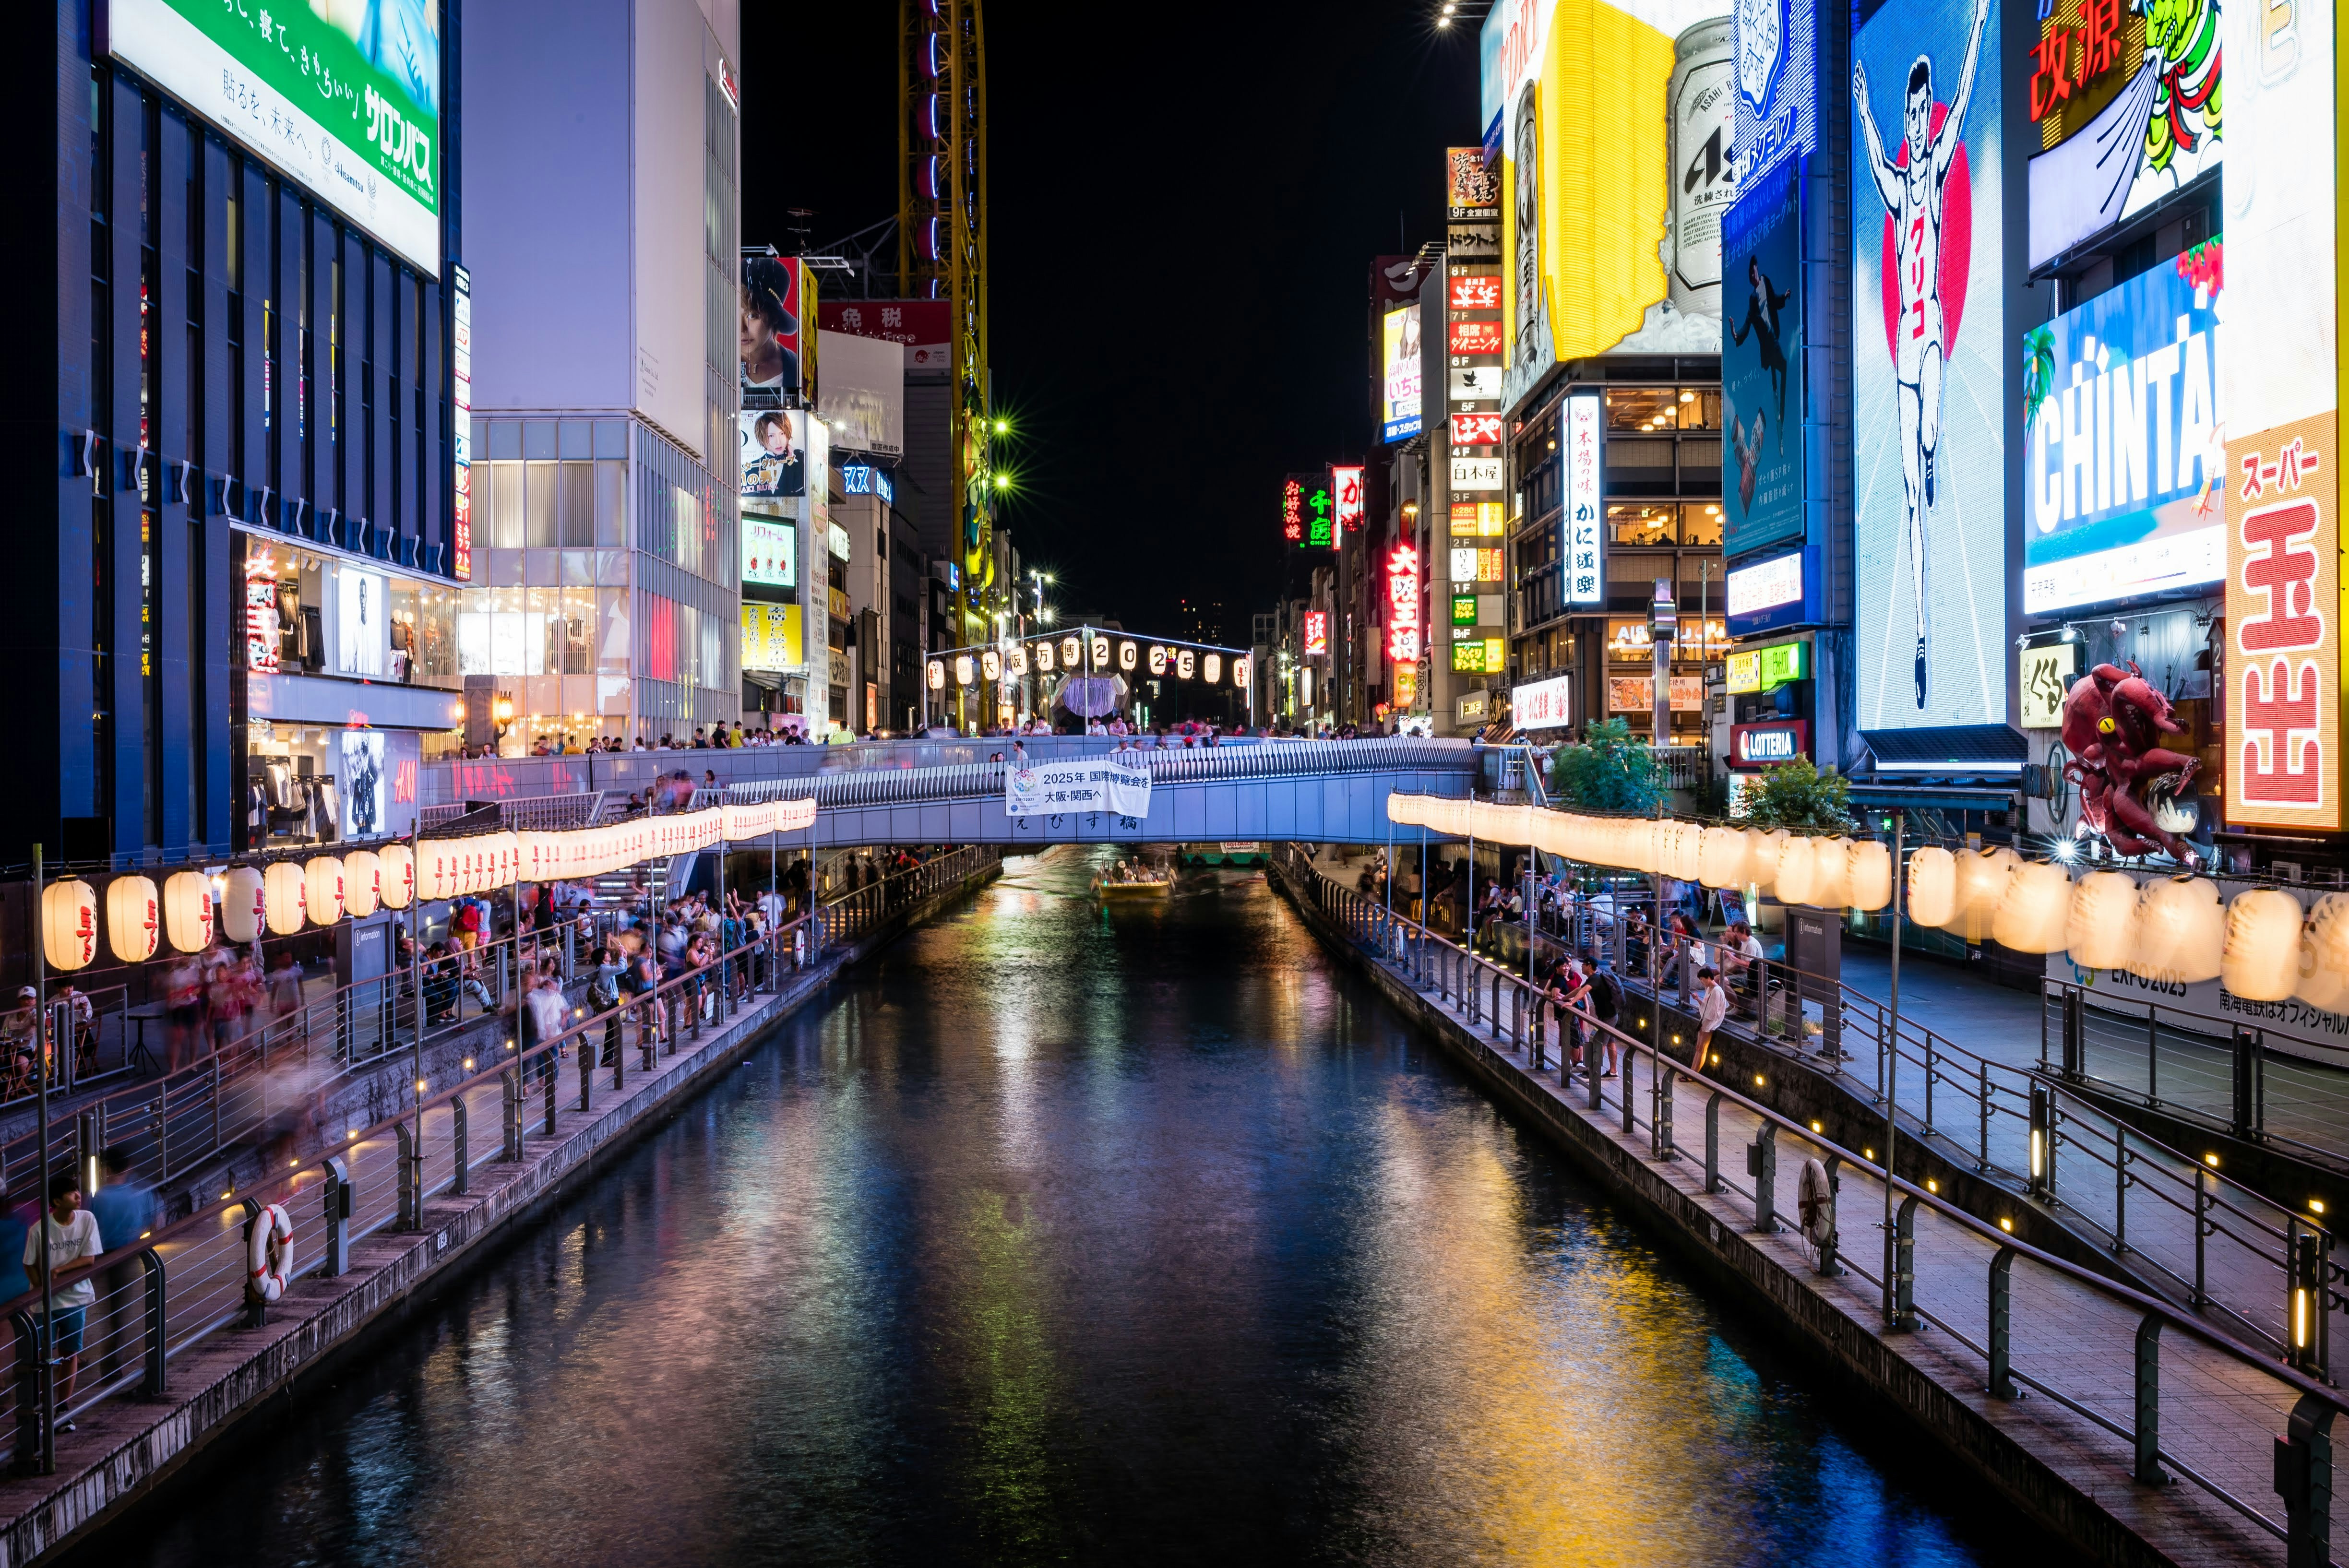 When the sun goes down, Osaka (esaecially Dotombori) becomes a festival of lights and colors.